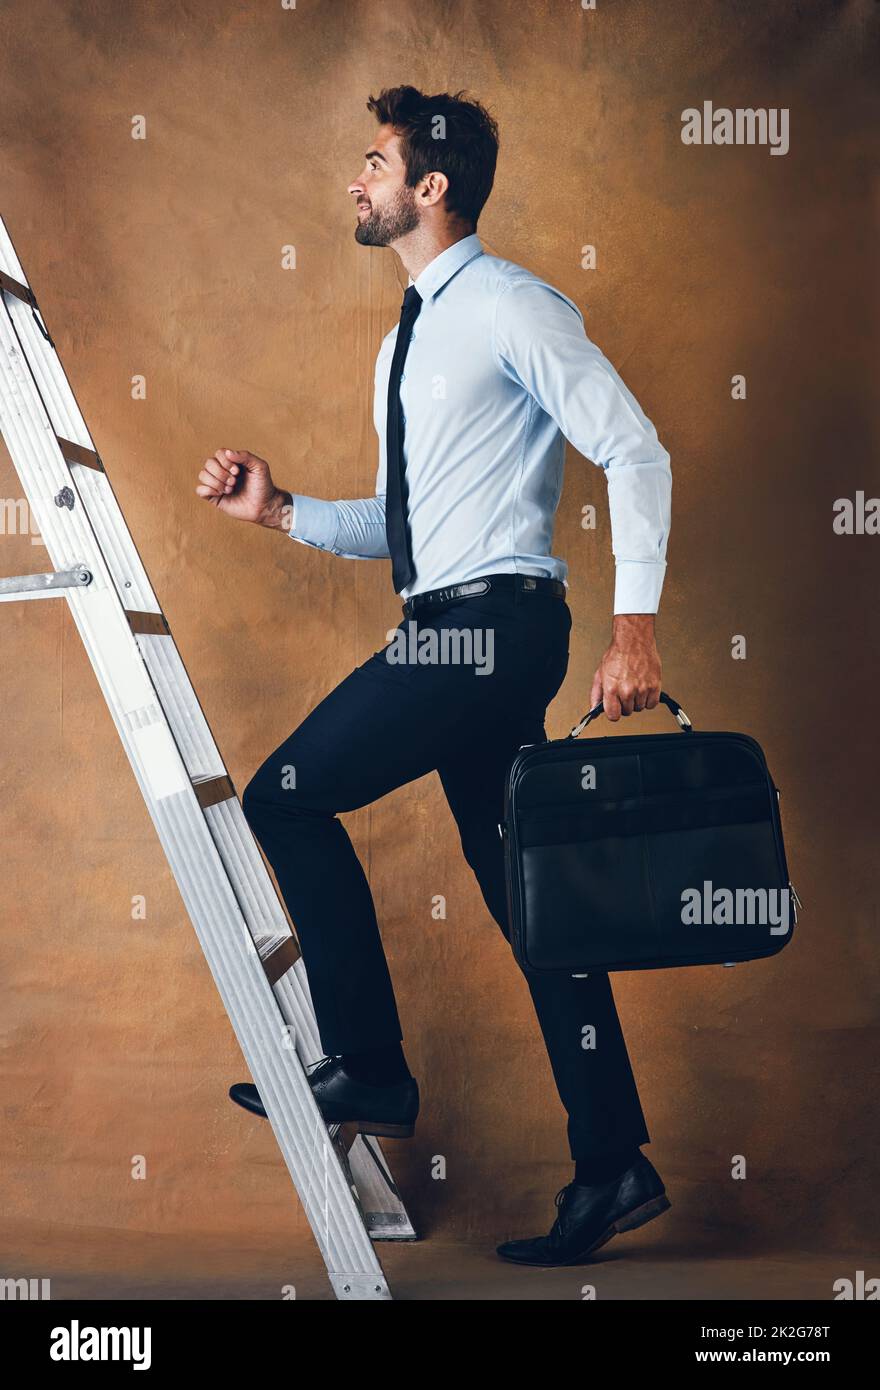 Up is the only option. Studio shot of a handsome young businessman climbing a ladder against a brown background. Stock Photo